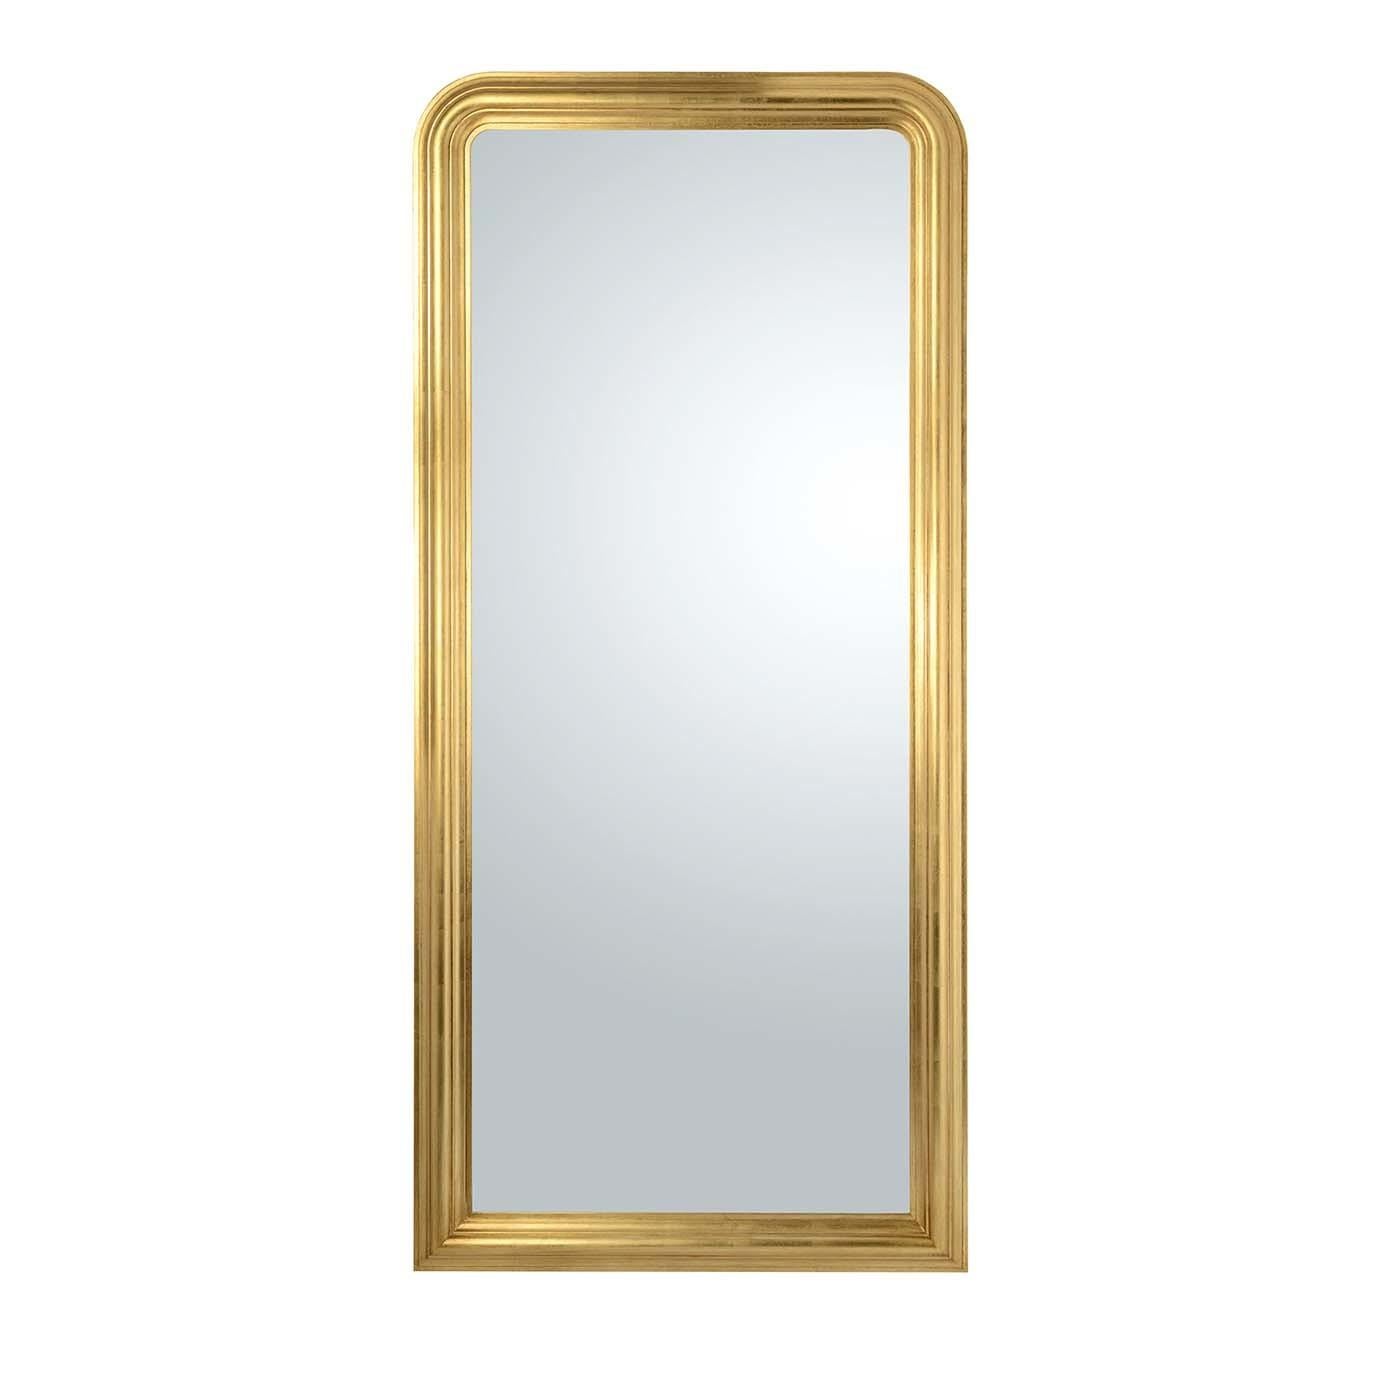 Showcasing a polished yet essential silhouette, this wall mirror will illuminate a room with the bright gold-leaf coating adorning its solid wooden frame. The wide surface is in precious Italian crystal and has a thickness of 4 mm. The frame's upper